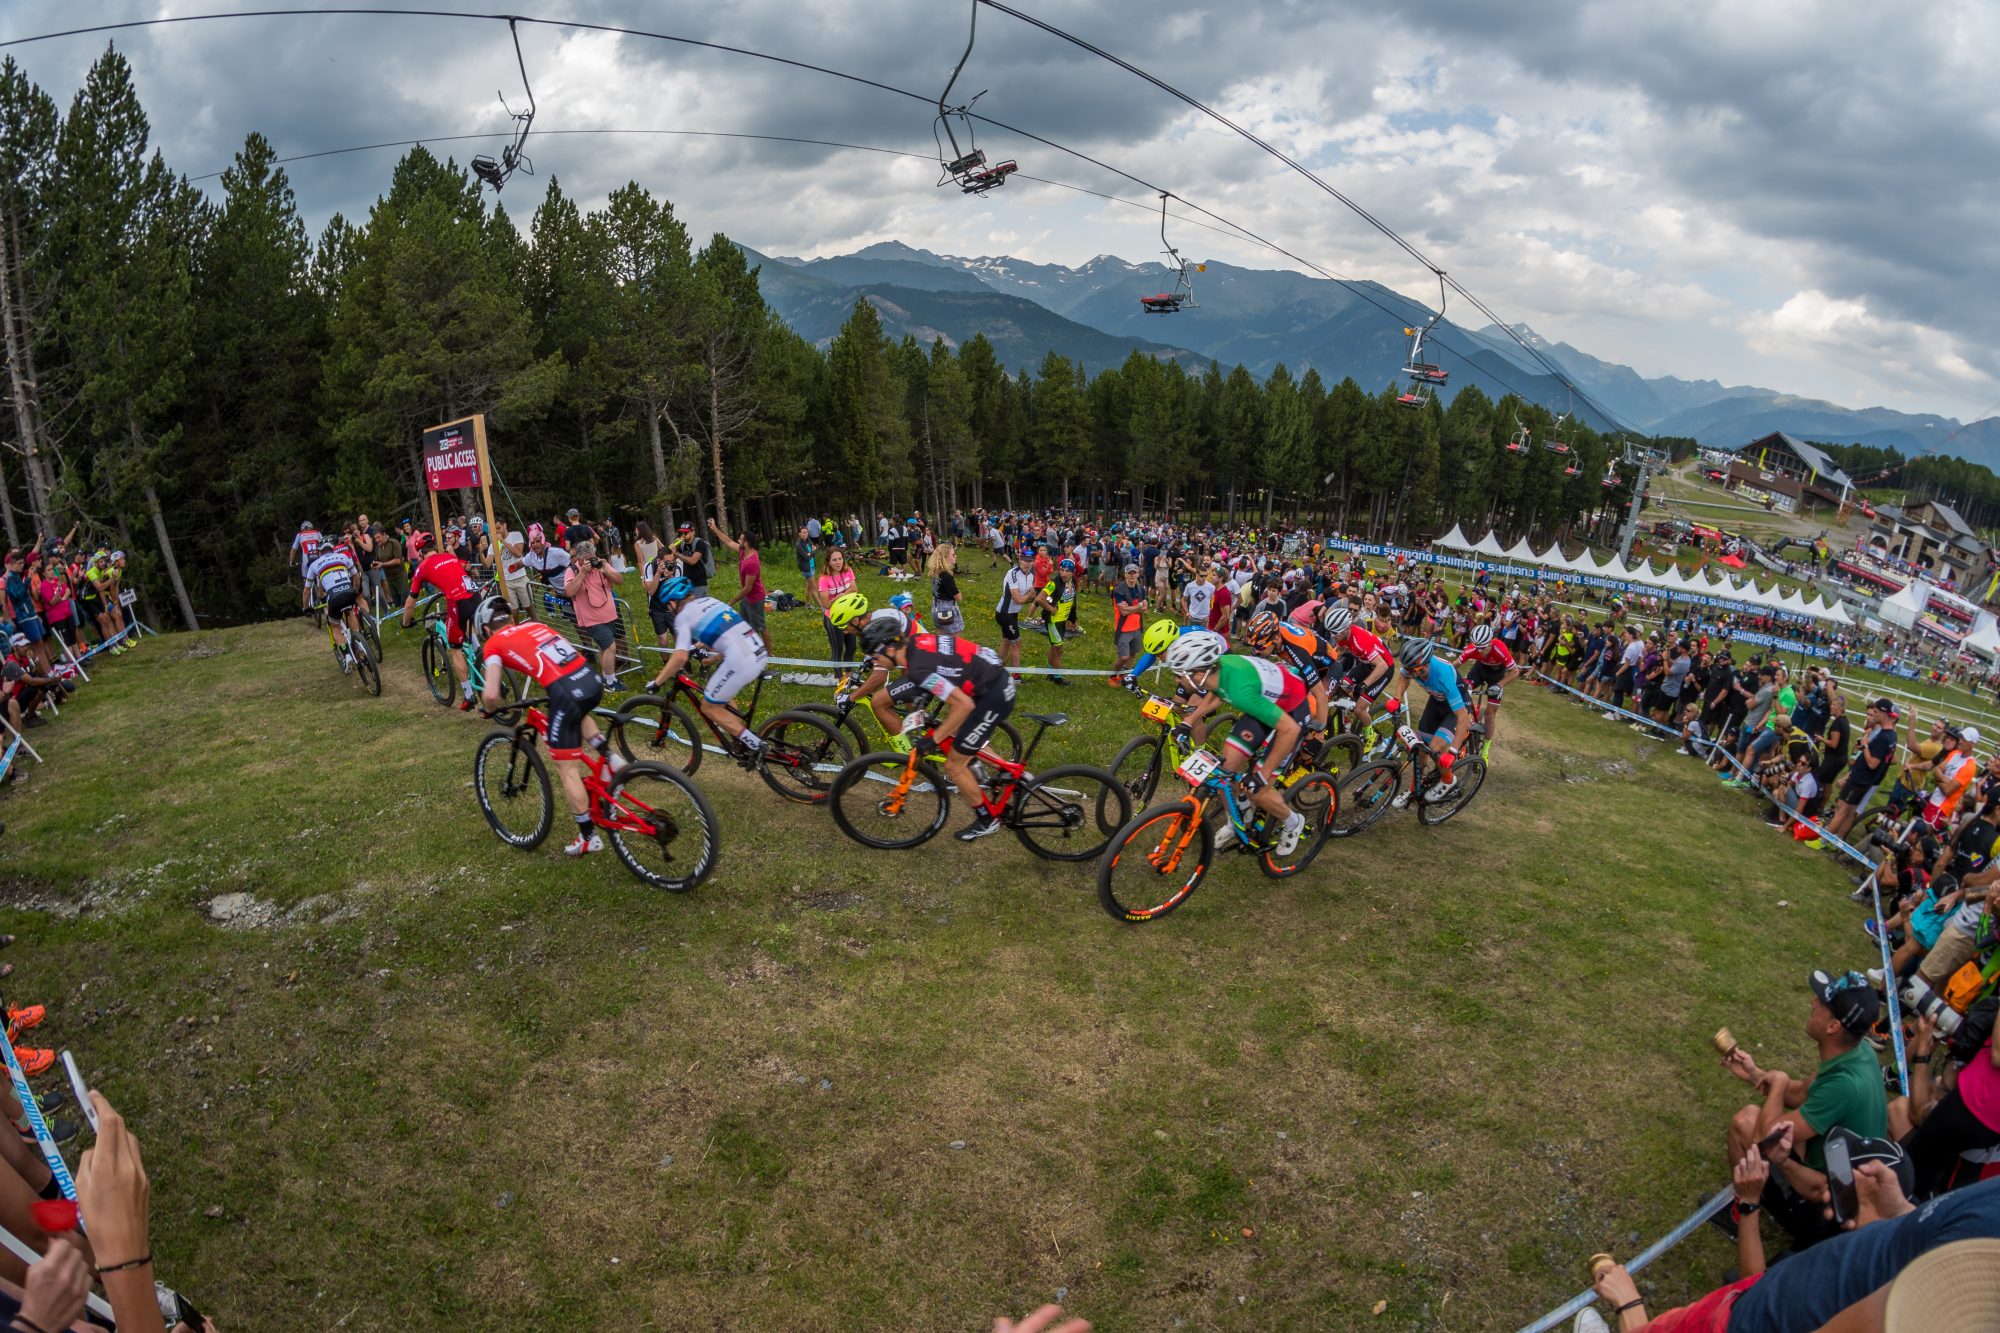 World Cup Vallnord Pal Arinsal 2018. Photo: Vallnord Pal Arinsal. Vallnord Pal Arinsal is ranked as one of the top 9 bike parks in the world by Red Bull.